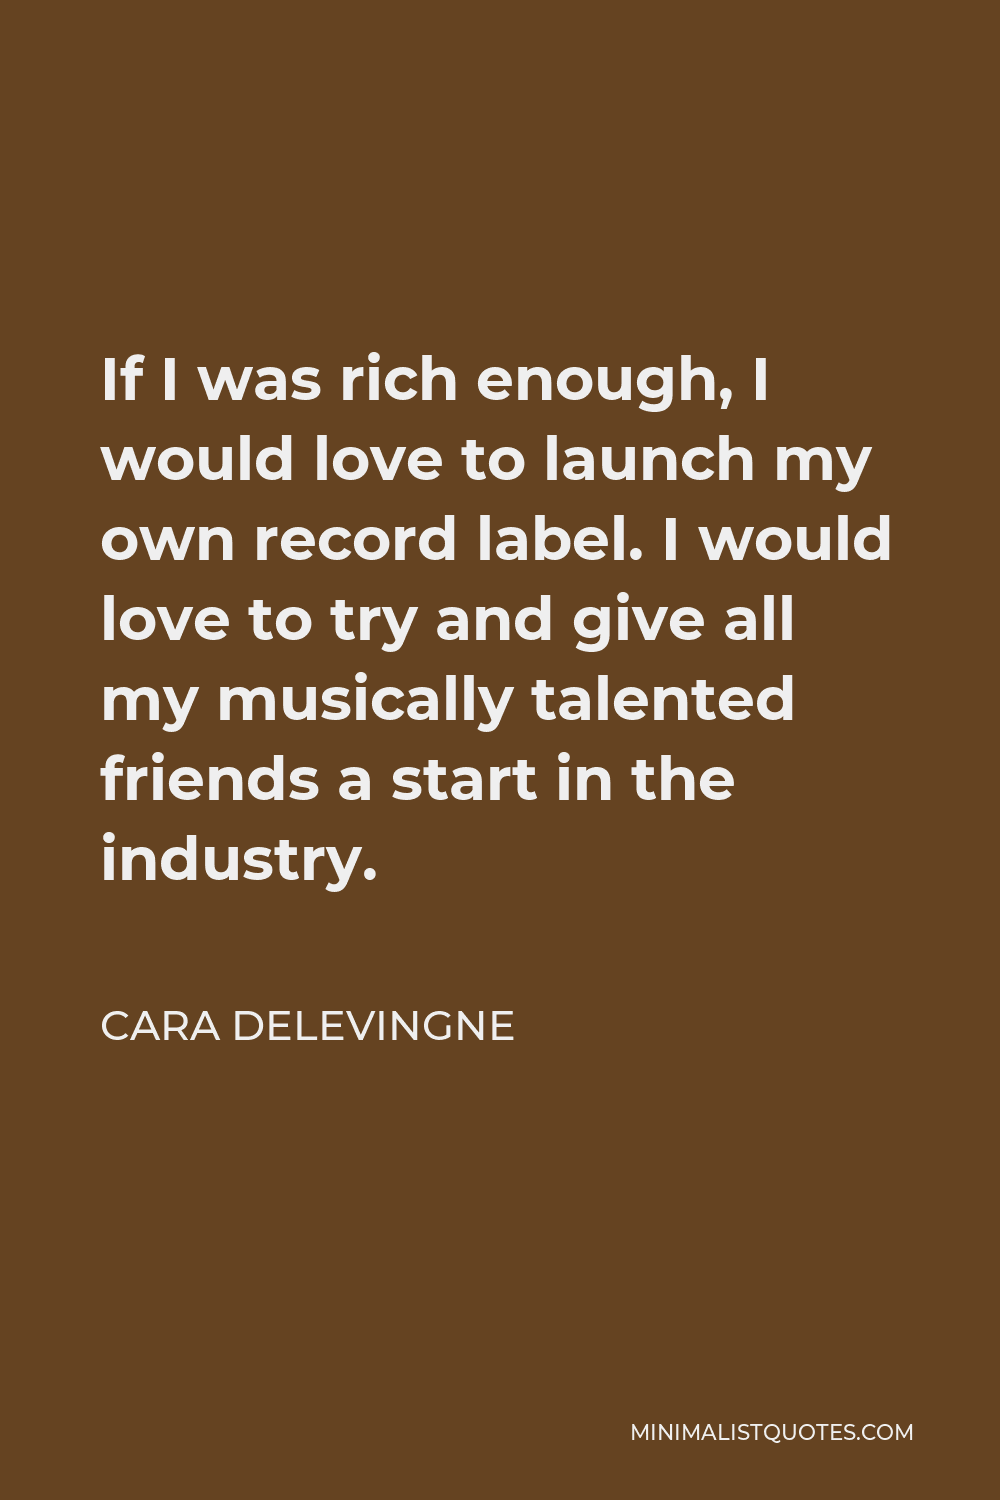 Cara Delevingne Quote - If I was rich enough, I would love to launch my own record label. I would love to try and give all my musically talented friends a start in the industry.